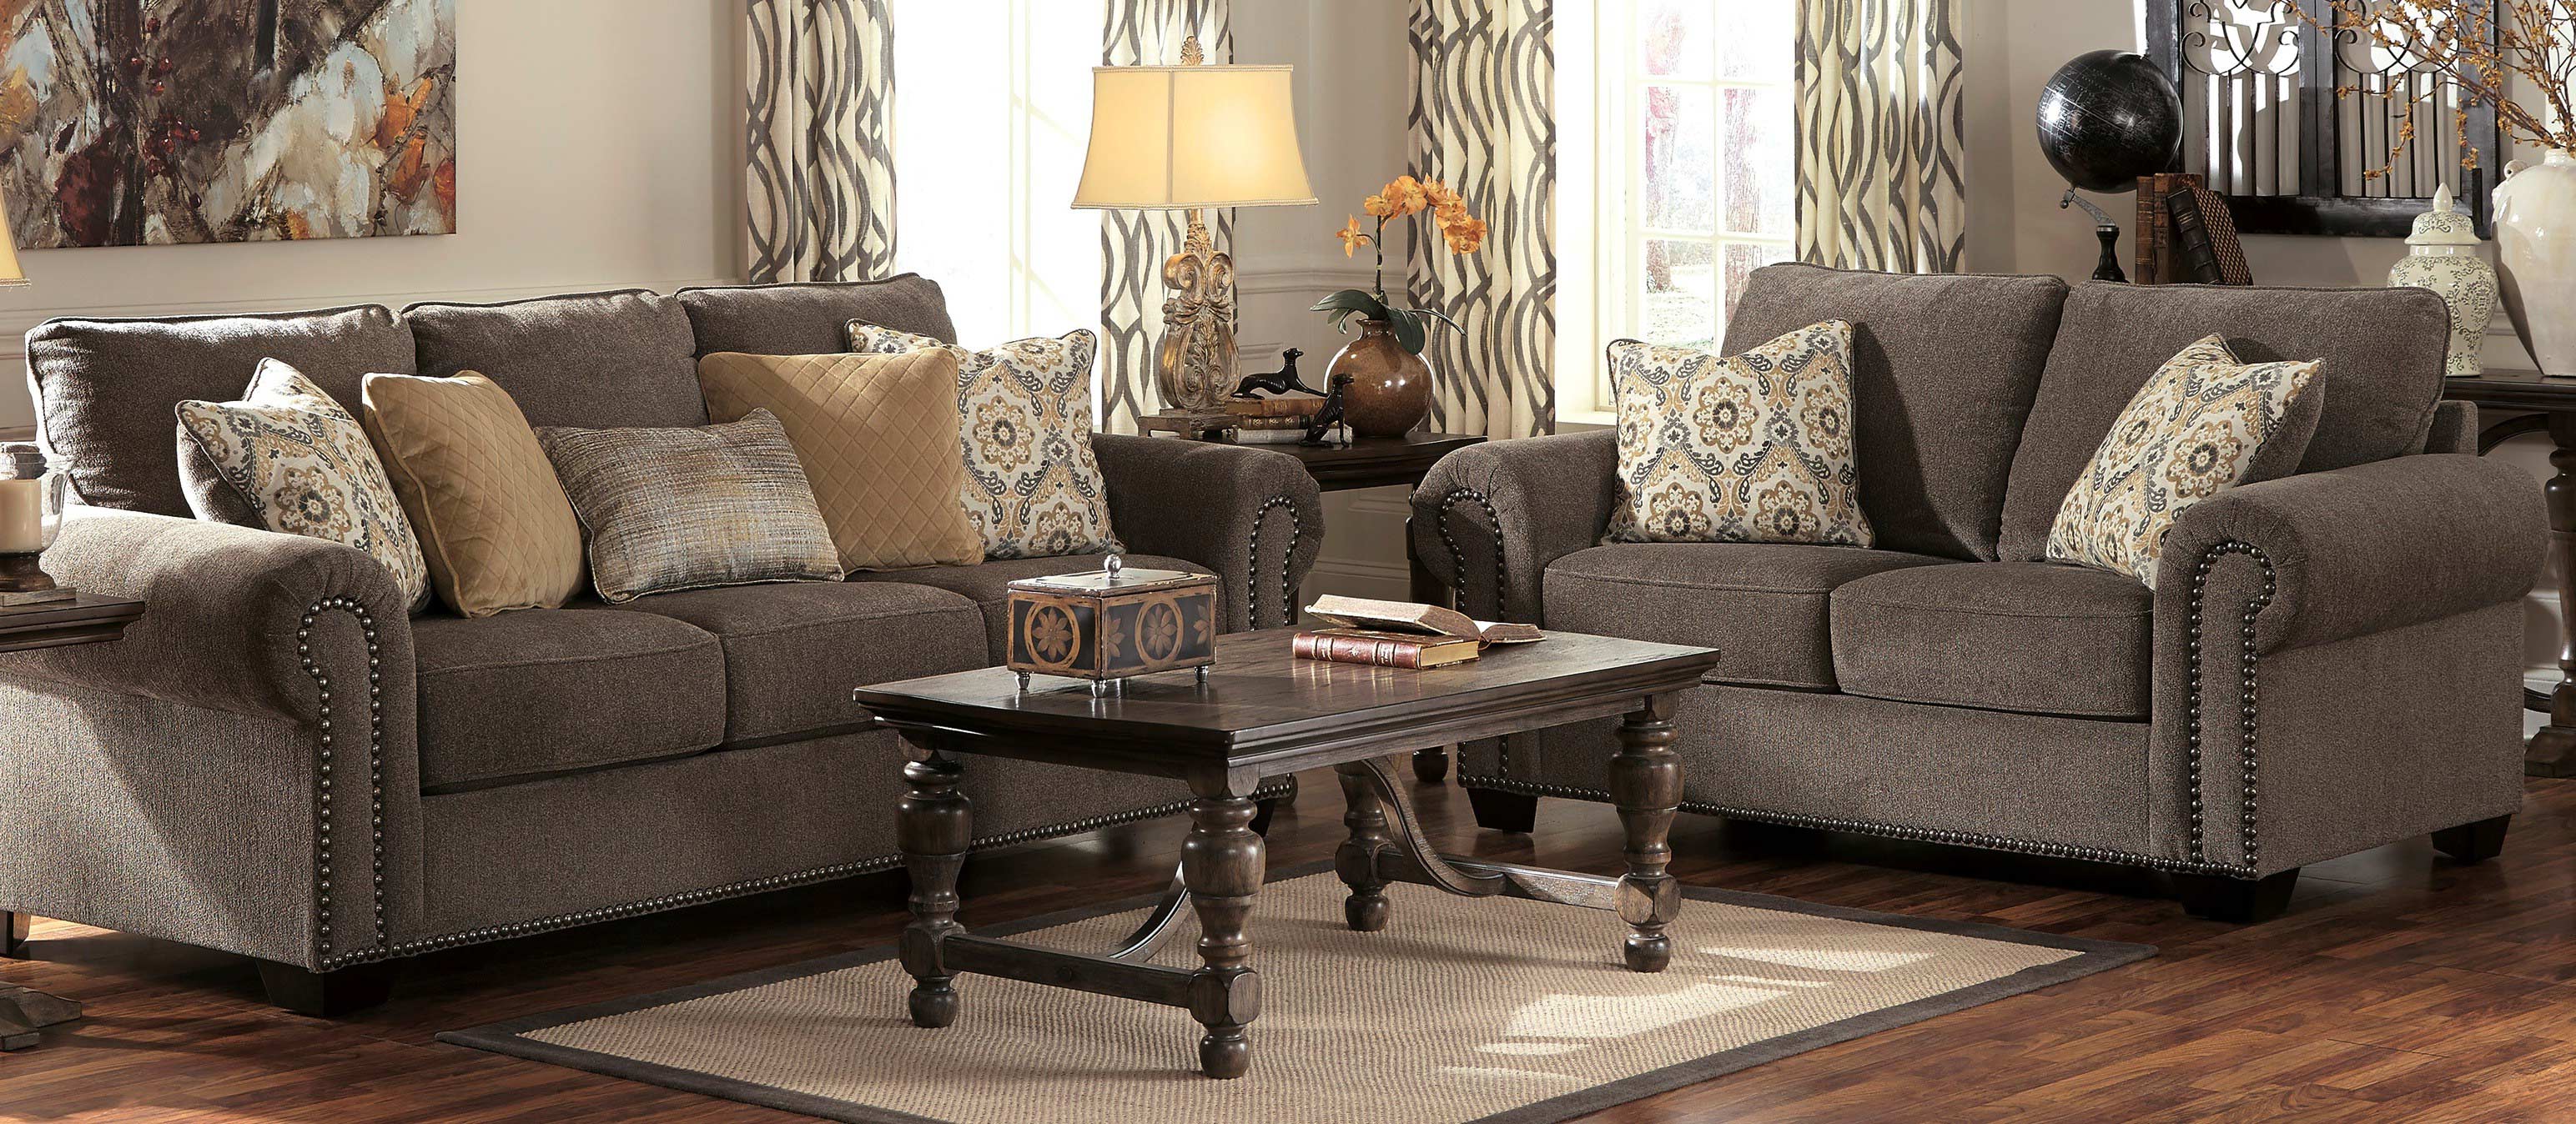 Rooms To Go Living Room Table Sets